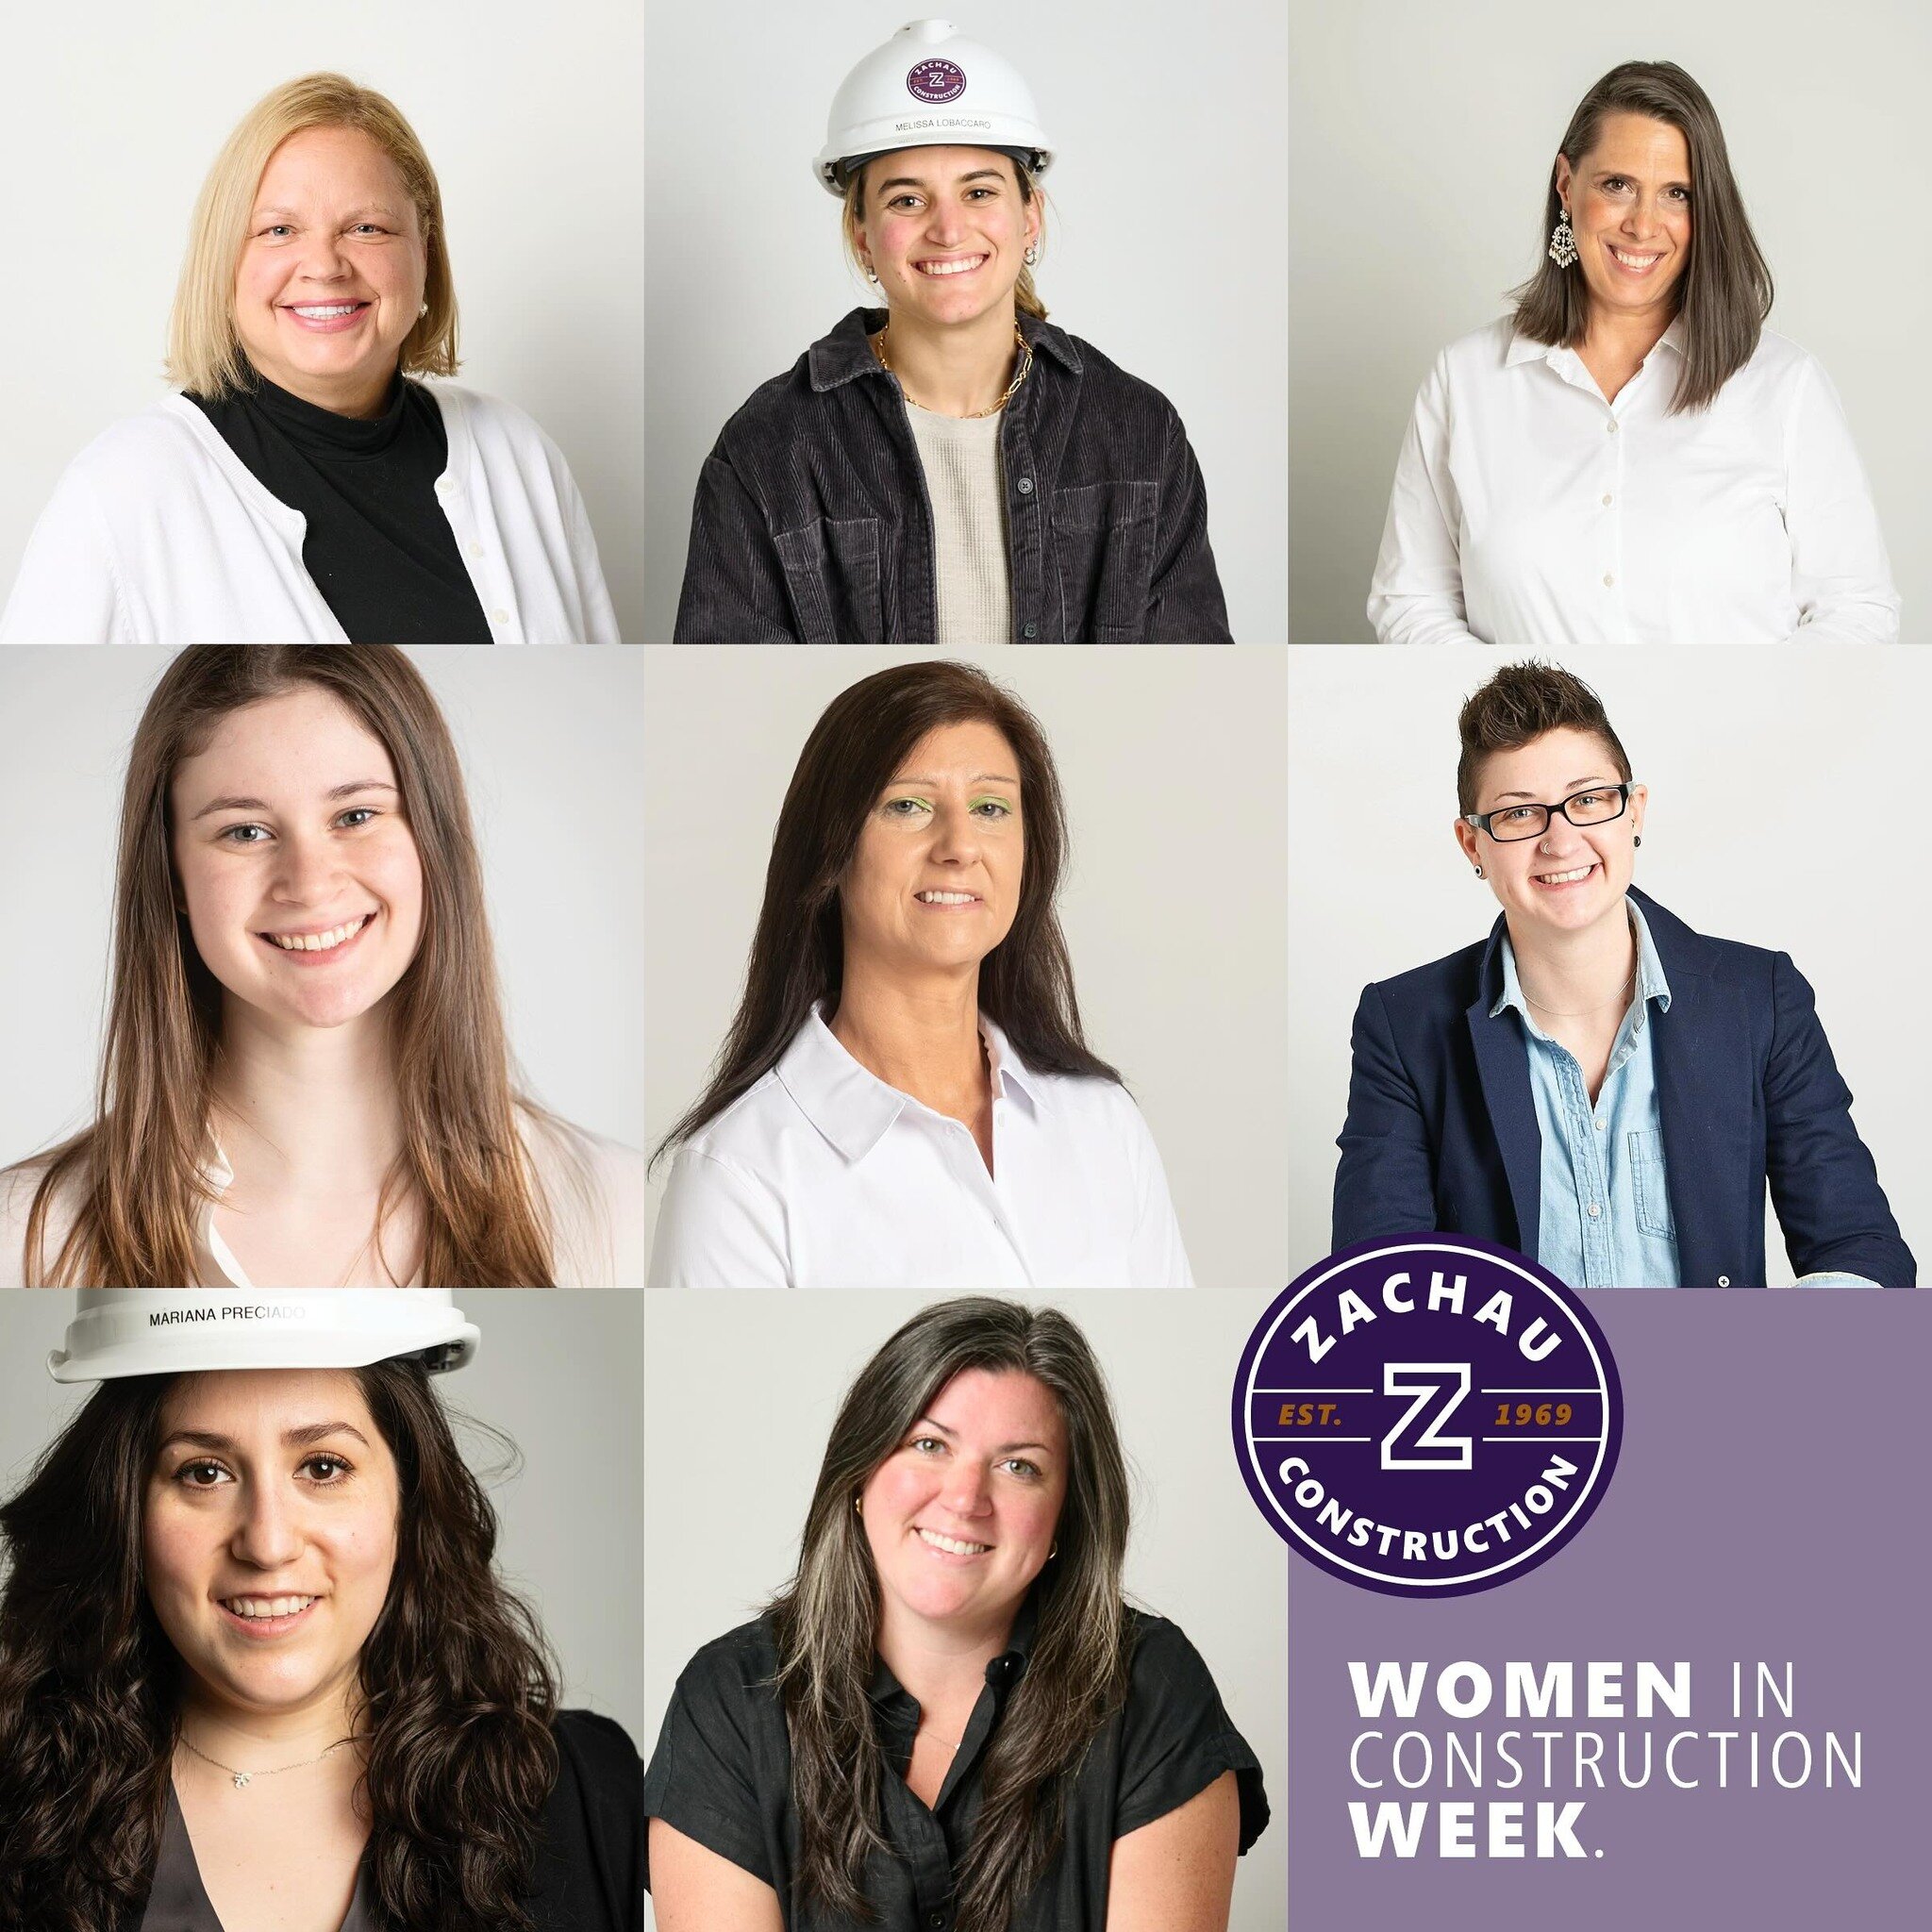 It&rsquo;s national women in construction week AND today is international women&rsquo;s day. These women contribute so much to Zachau Construction and we are thankful they are on our team! Happy day to all the women in our lives, we appreciate you!